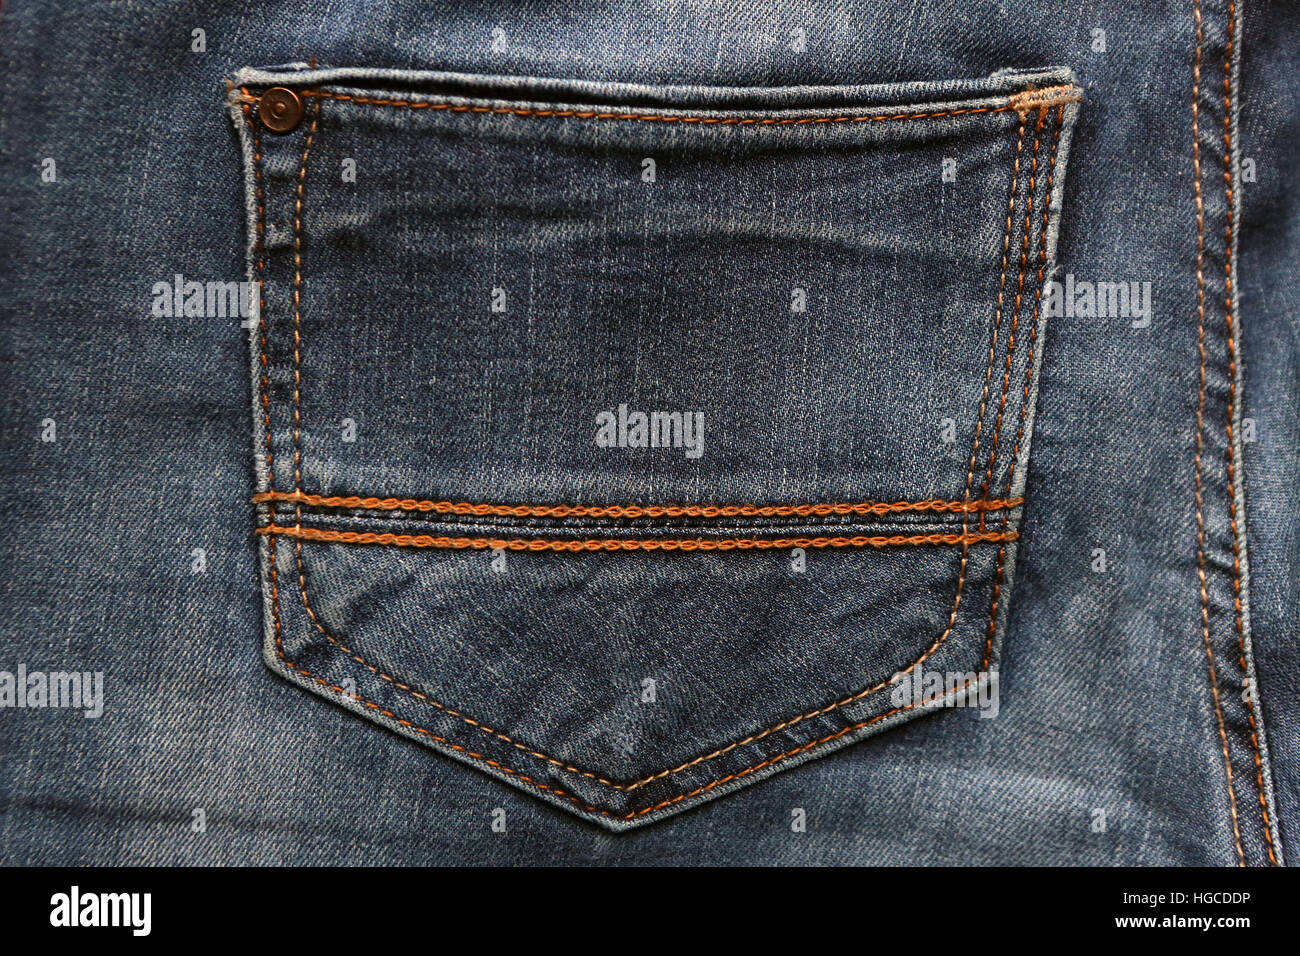 Black jeans texture and background Jeans pocket Stock Photo - Alamy